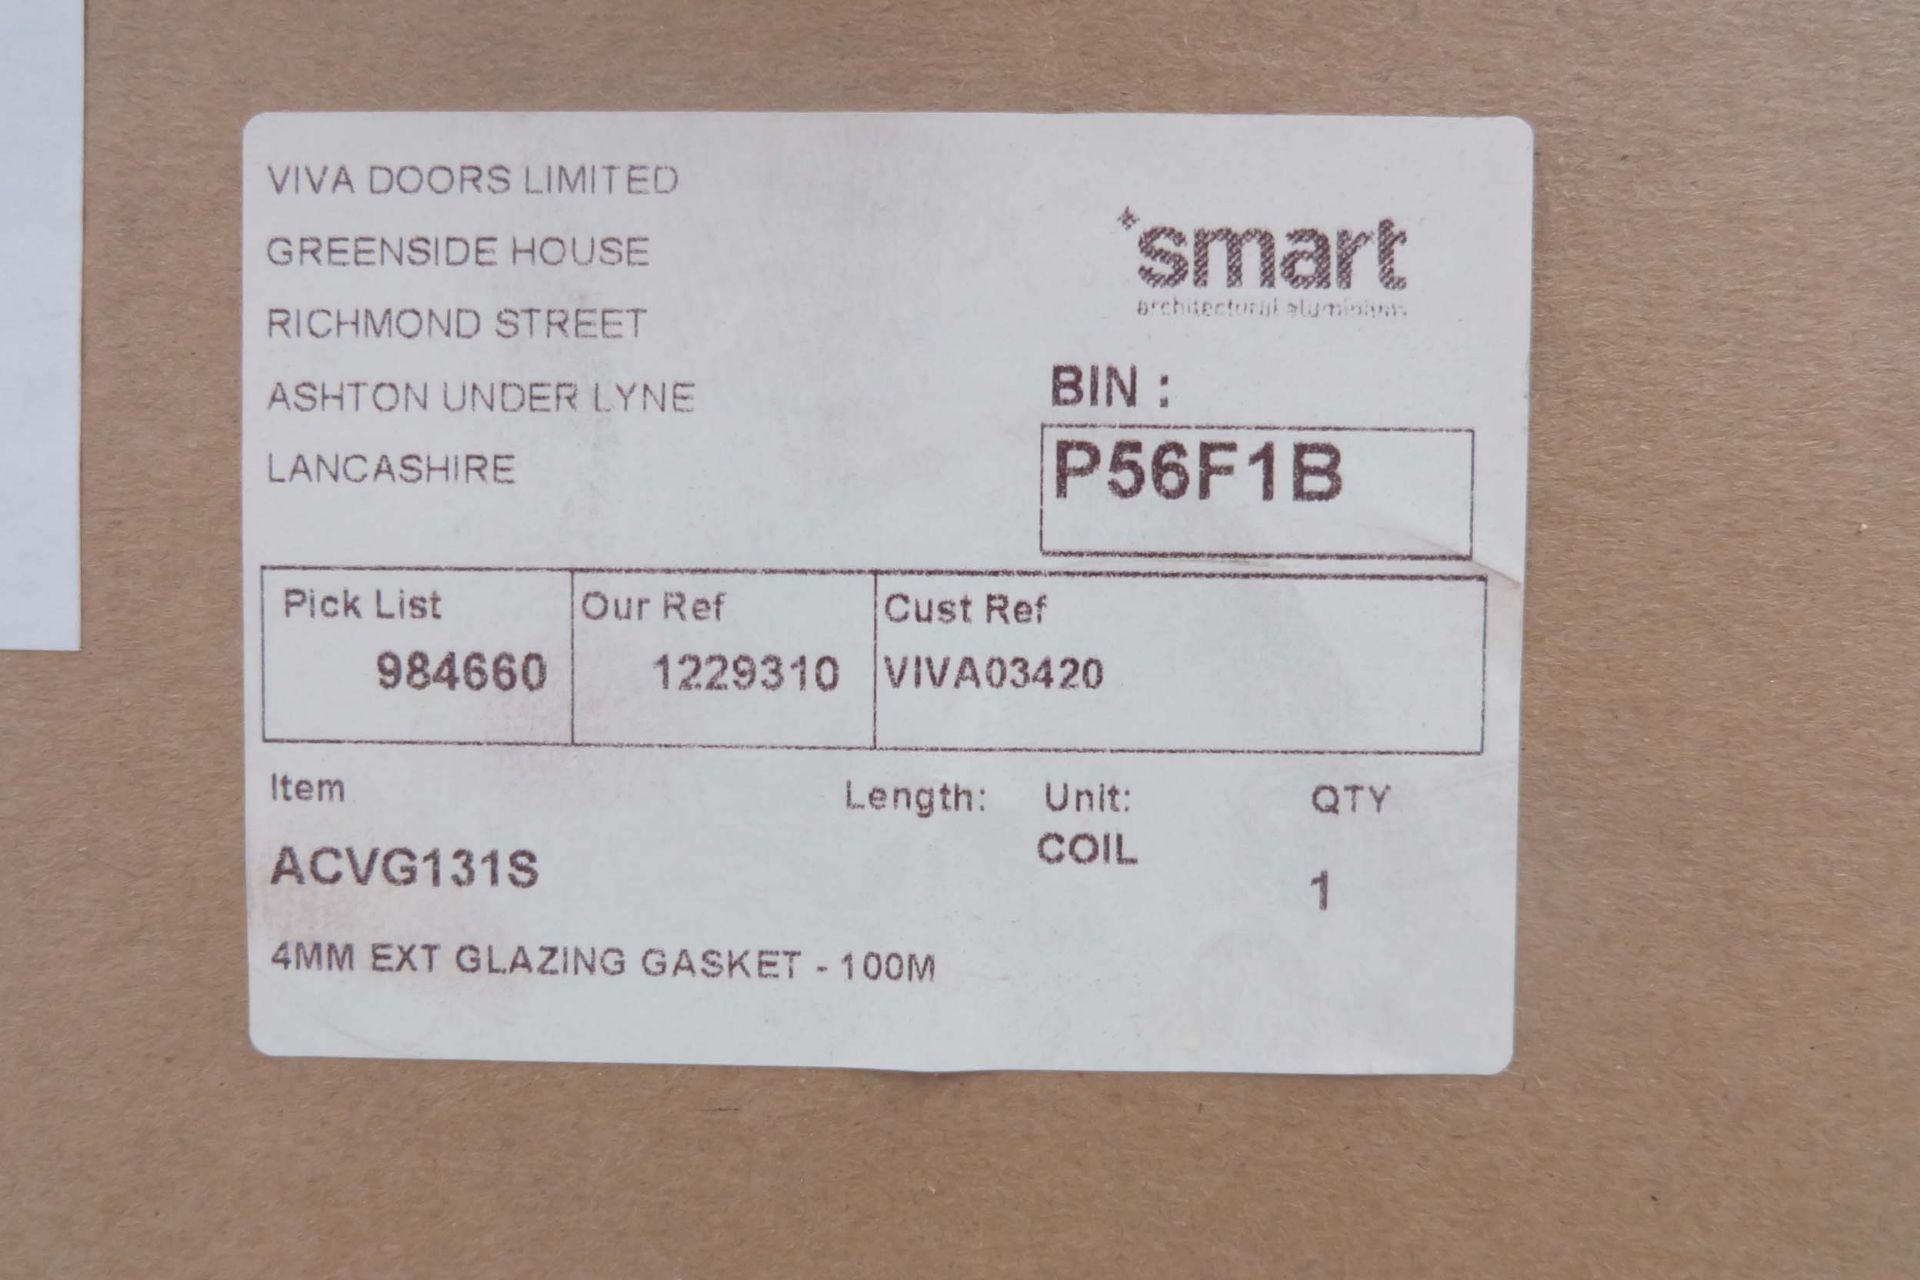 Smart Architectural Aluminium Ltd. 4mm Ext Glazing Gasket in Black. 6 x Coils of 100 Mtrs (Approx) - Image 3 of 3